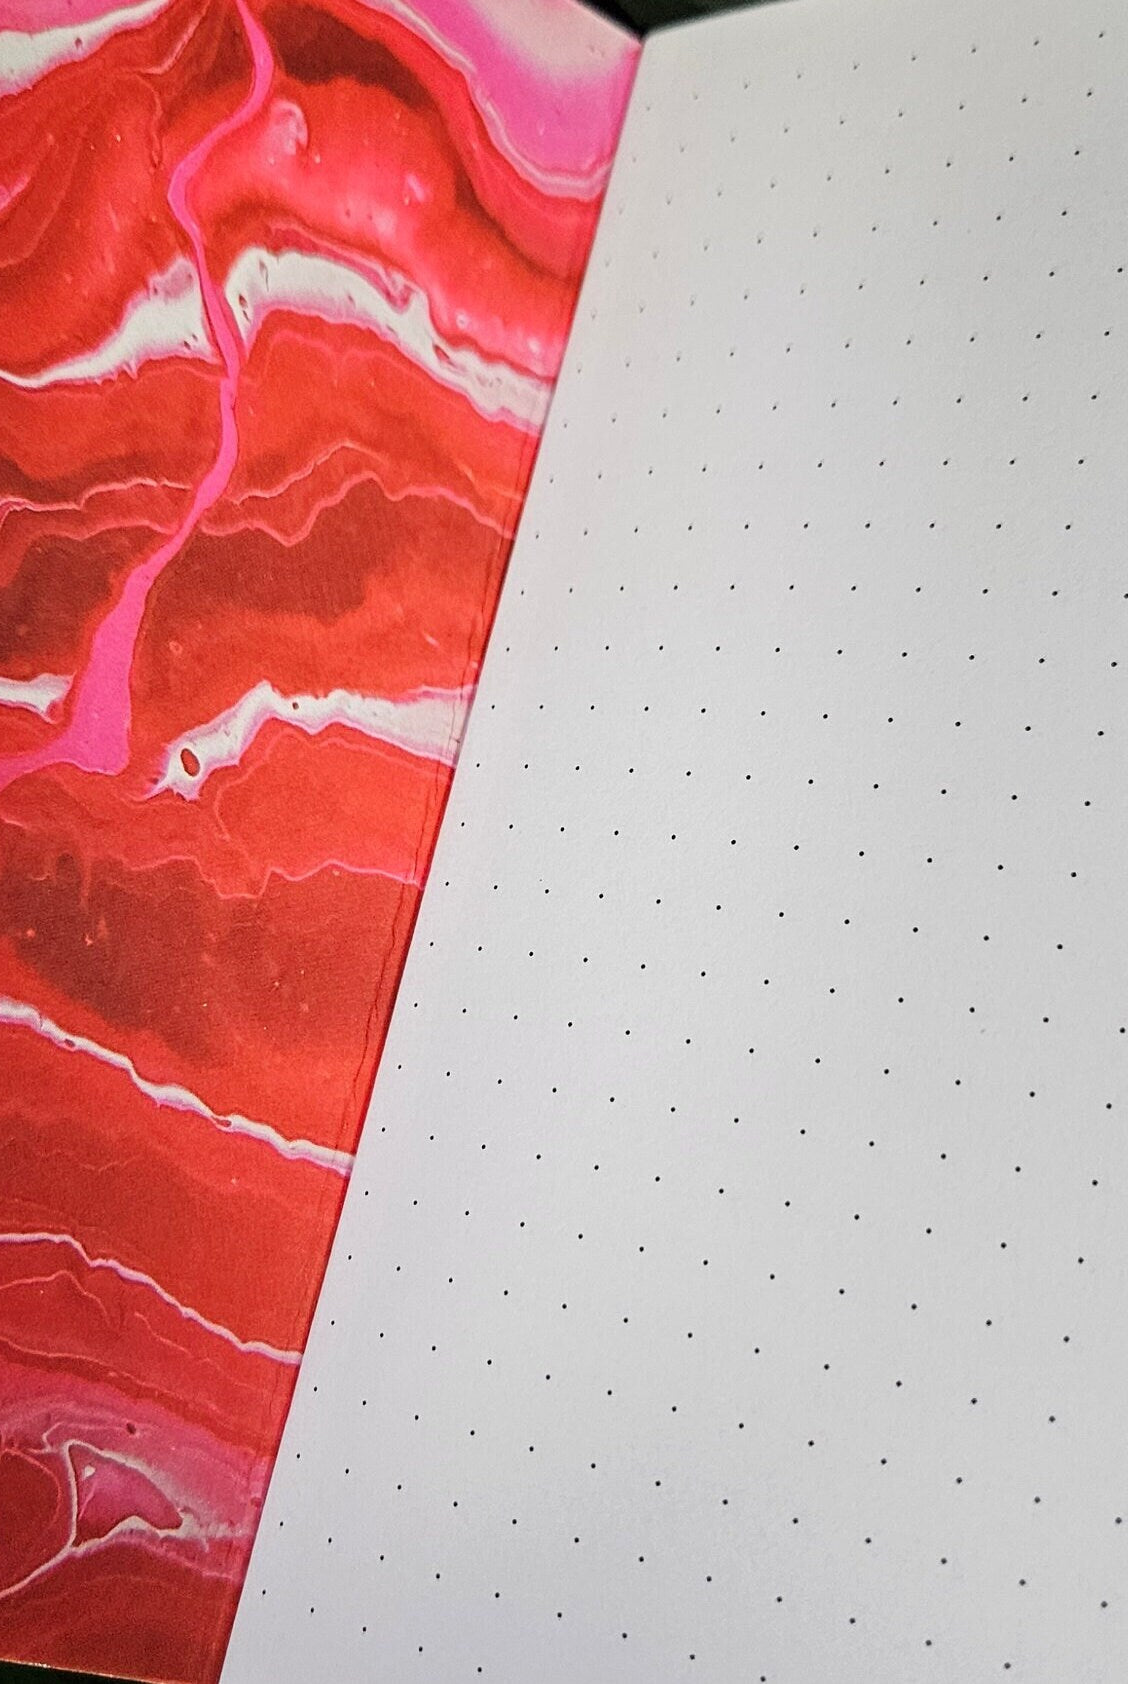 POCKET NOTEBOOK: Garnet Crystal Heart with DOT Grid Pages